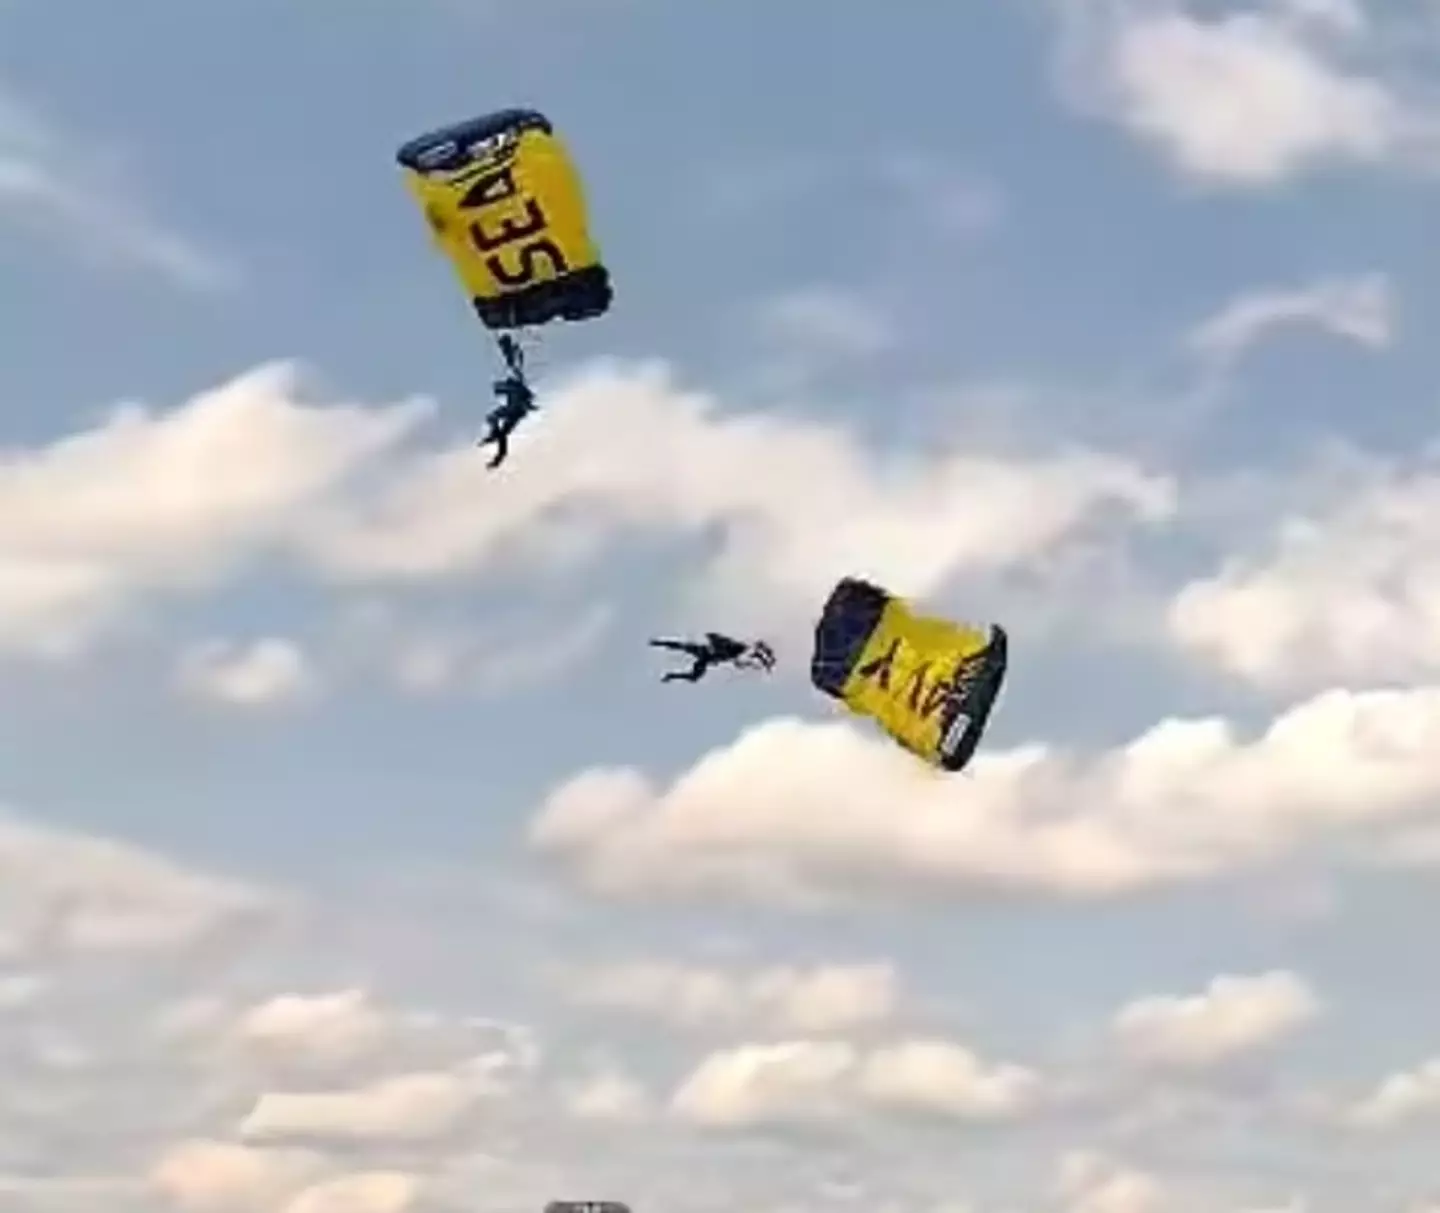 The parachute stunt ended with a man going to the hospital.